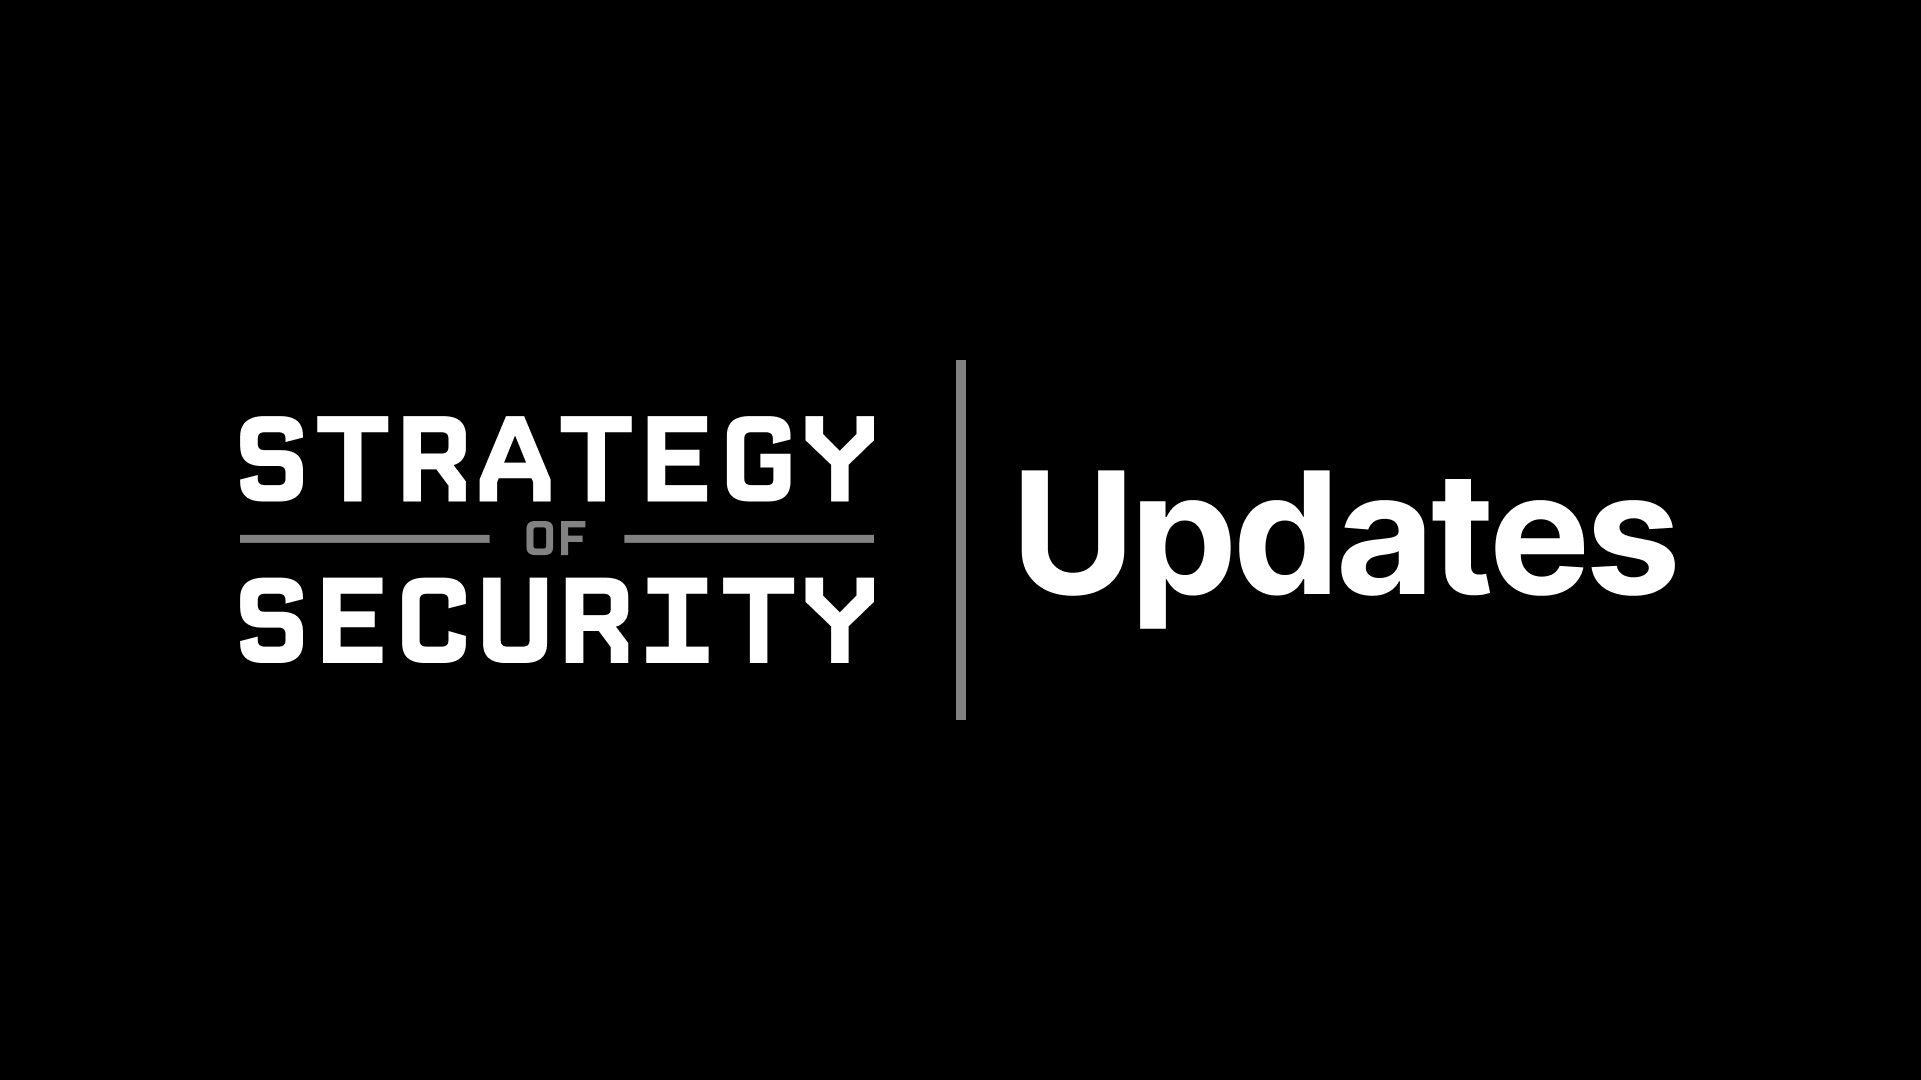 Updates on Strategy of Security's Publishing Schedule, Approach, and More